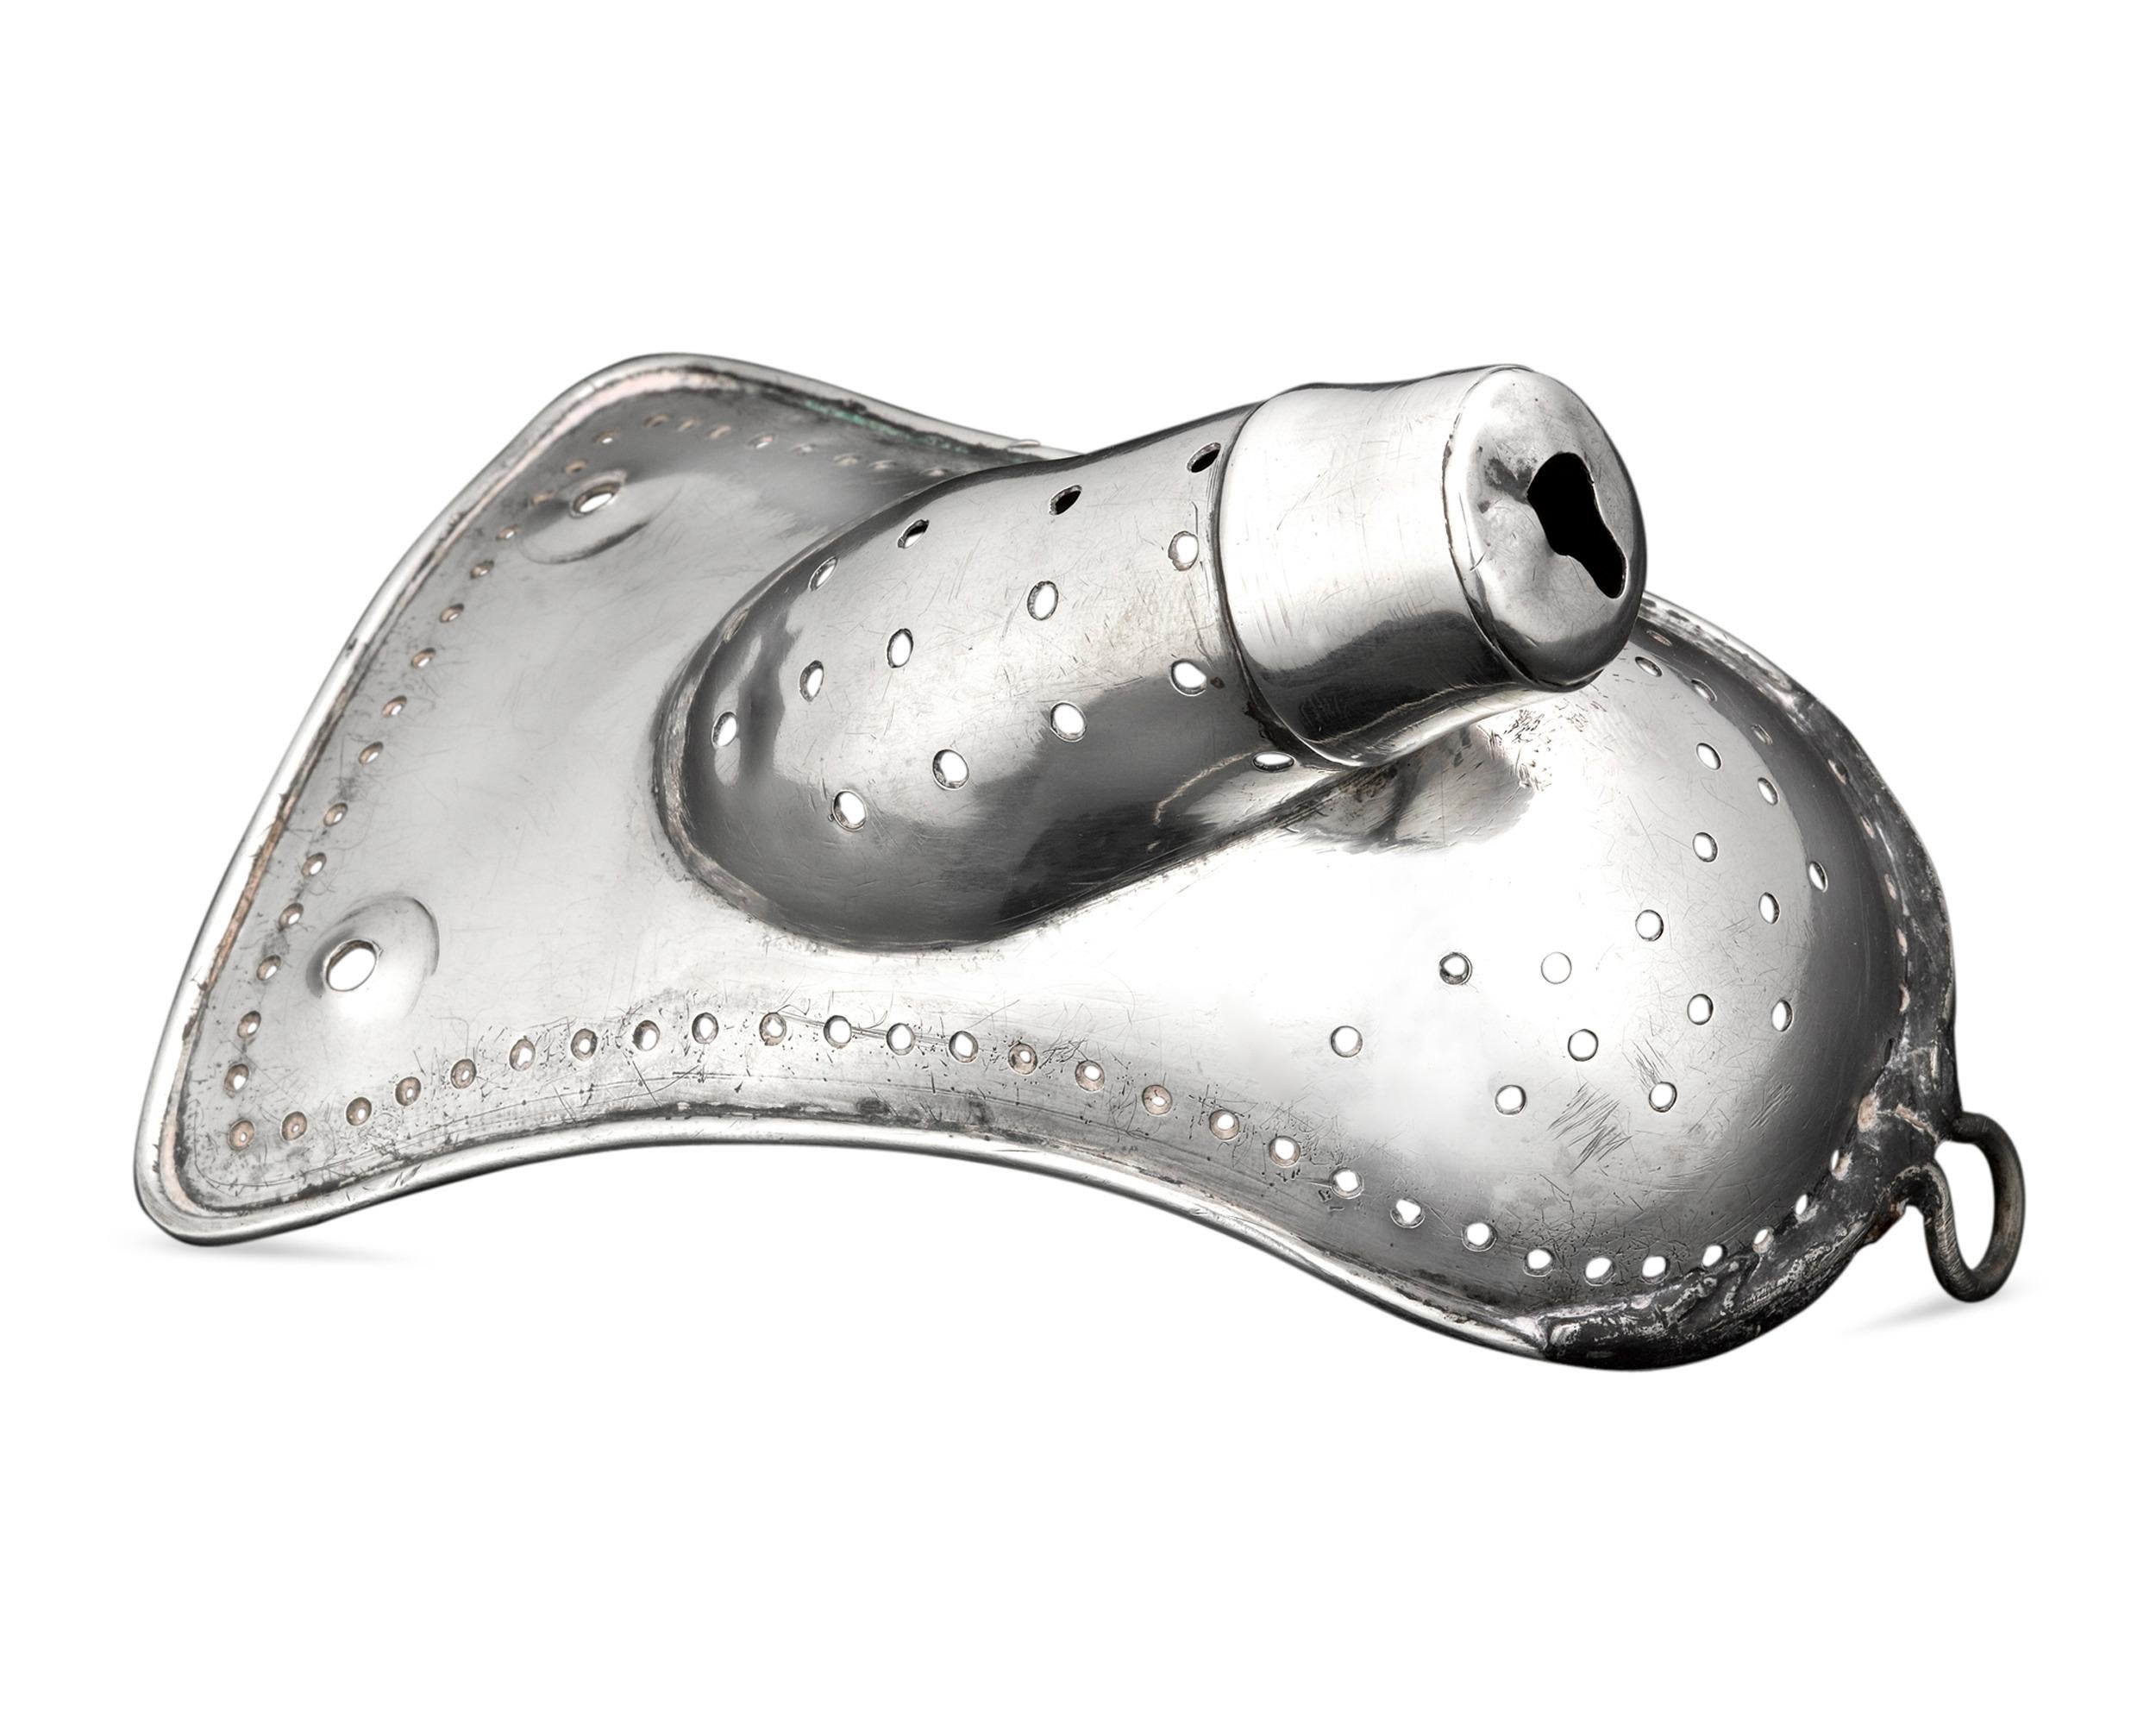 This remarkably rare and intriguing 19th century silver adolescent chastity device was designed to accommodate the male anatomy. Perforated and featuring wire-work rims, this device was most likely fitted into a leather harness-like belt and meant